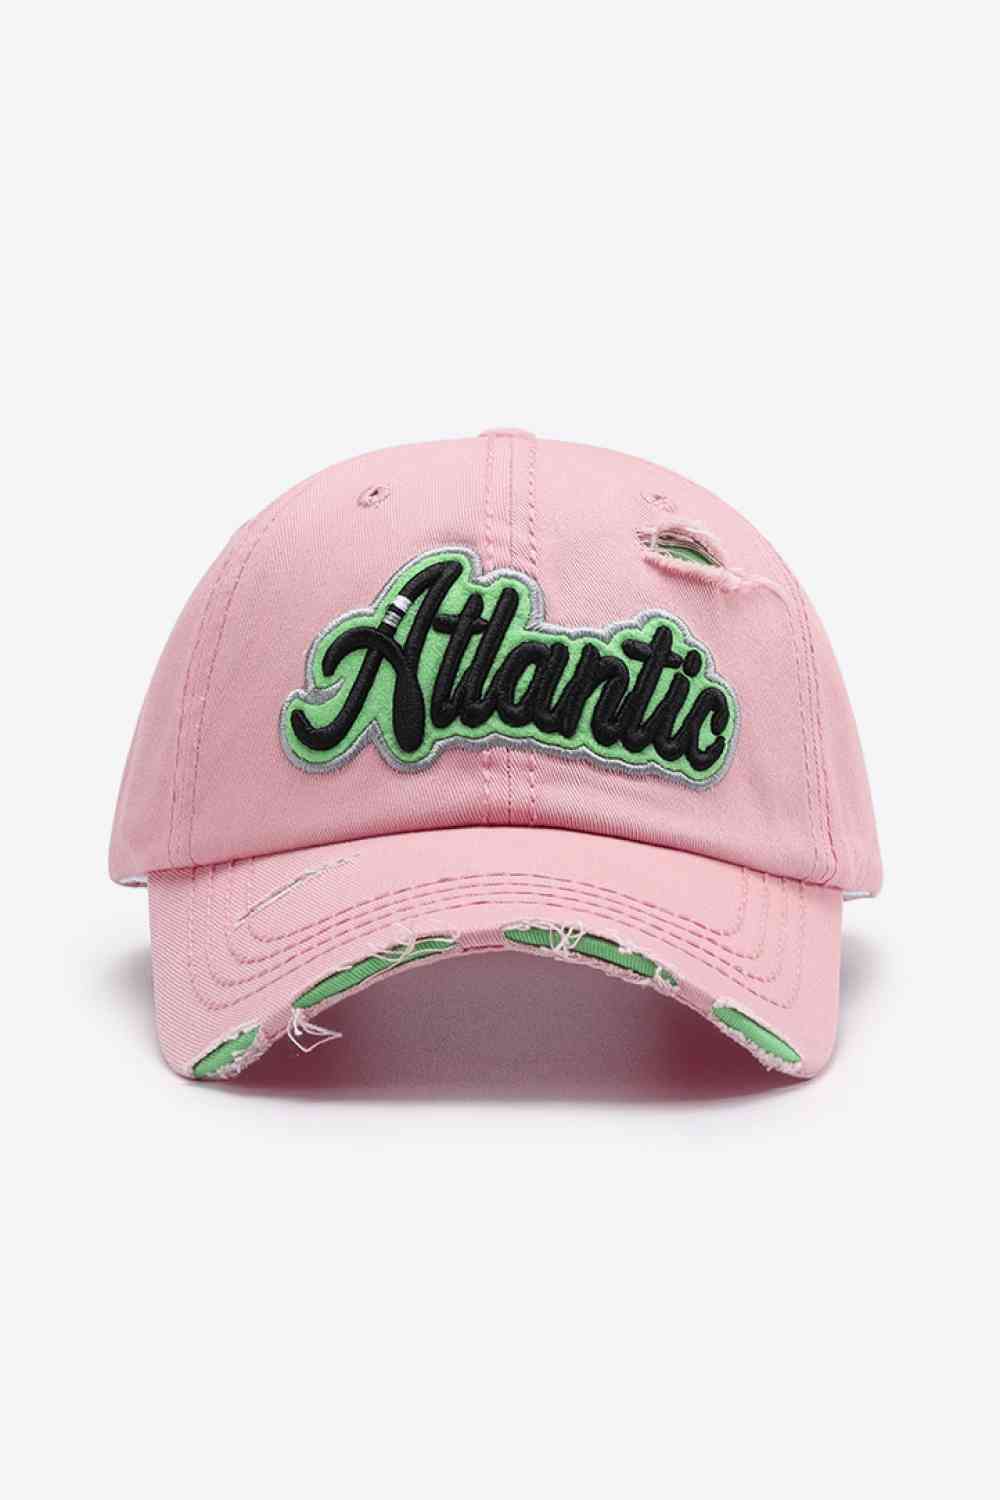 ATLANTIC Graphic Distressed Baseball Cap Pink One Size